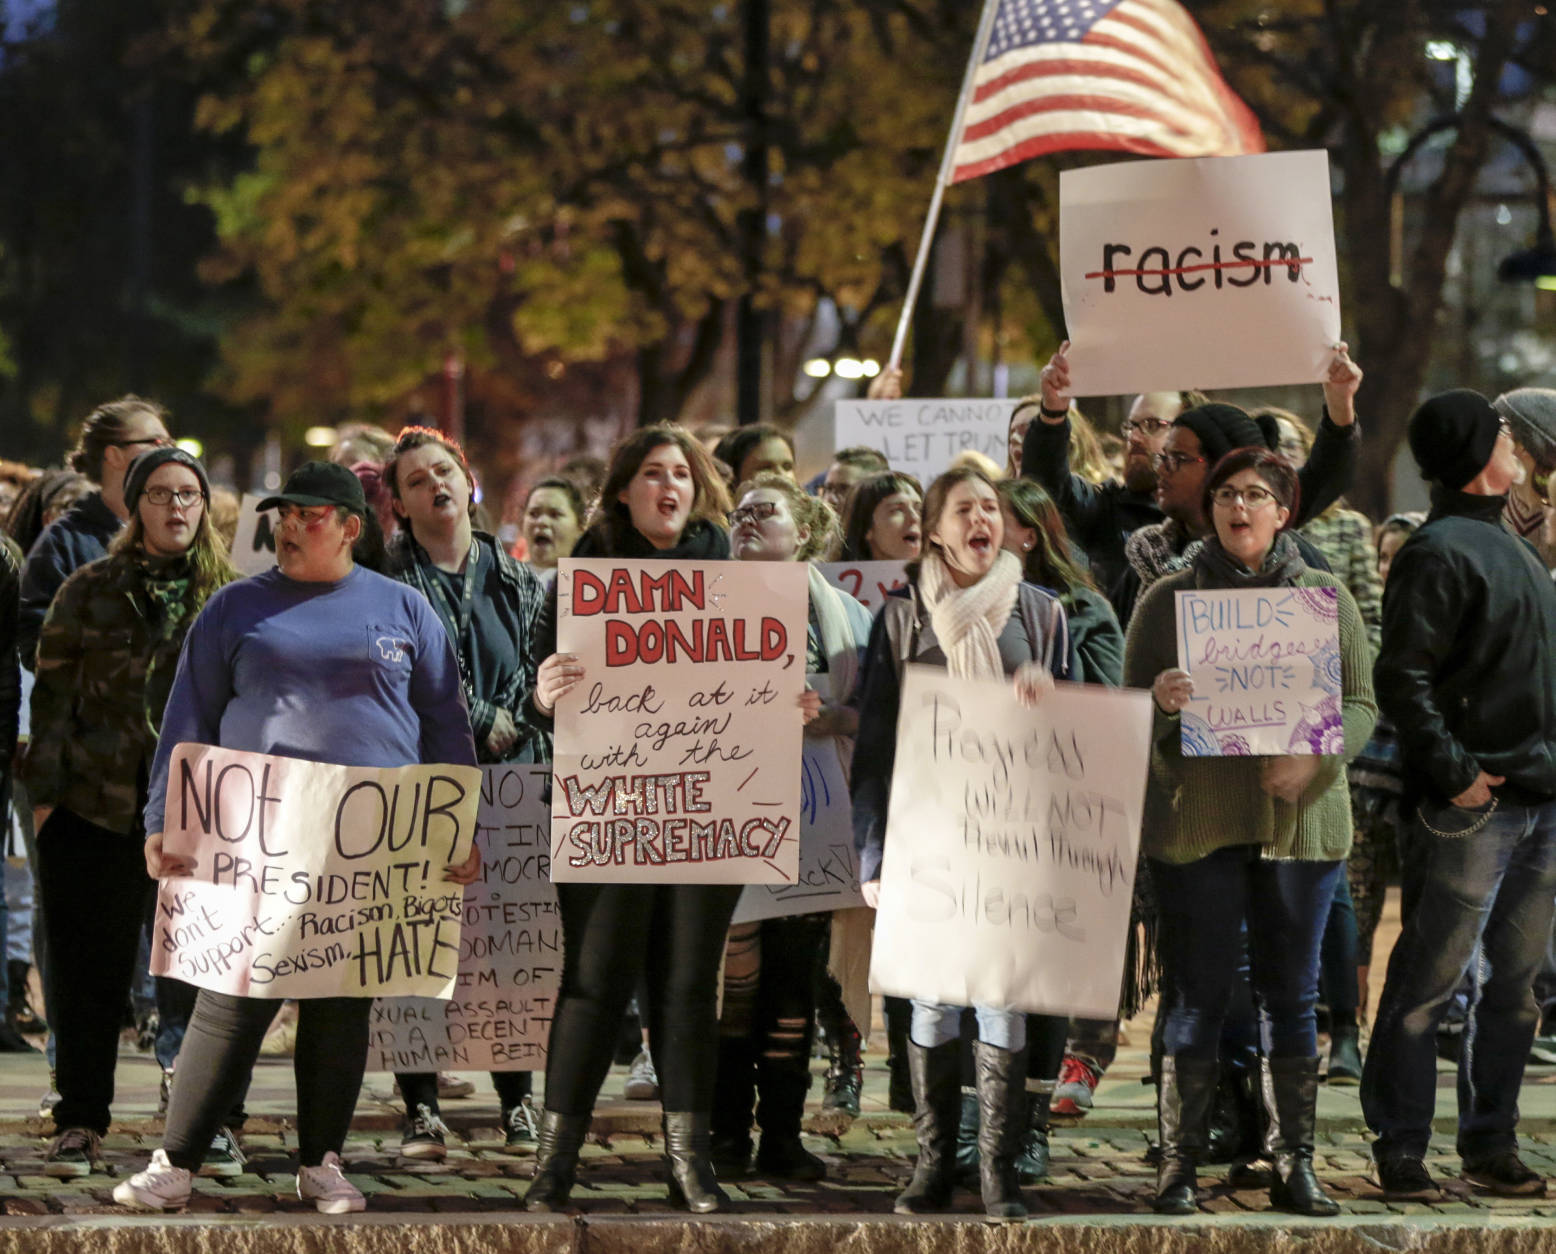 Demonstrators wave signs during a protest in downtown Omaha, Neb., Friday, Nov. 11, 2016, against the election of Donald Trump as President. (AP Photo/Nati Harnik)